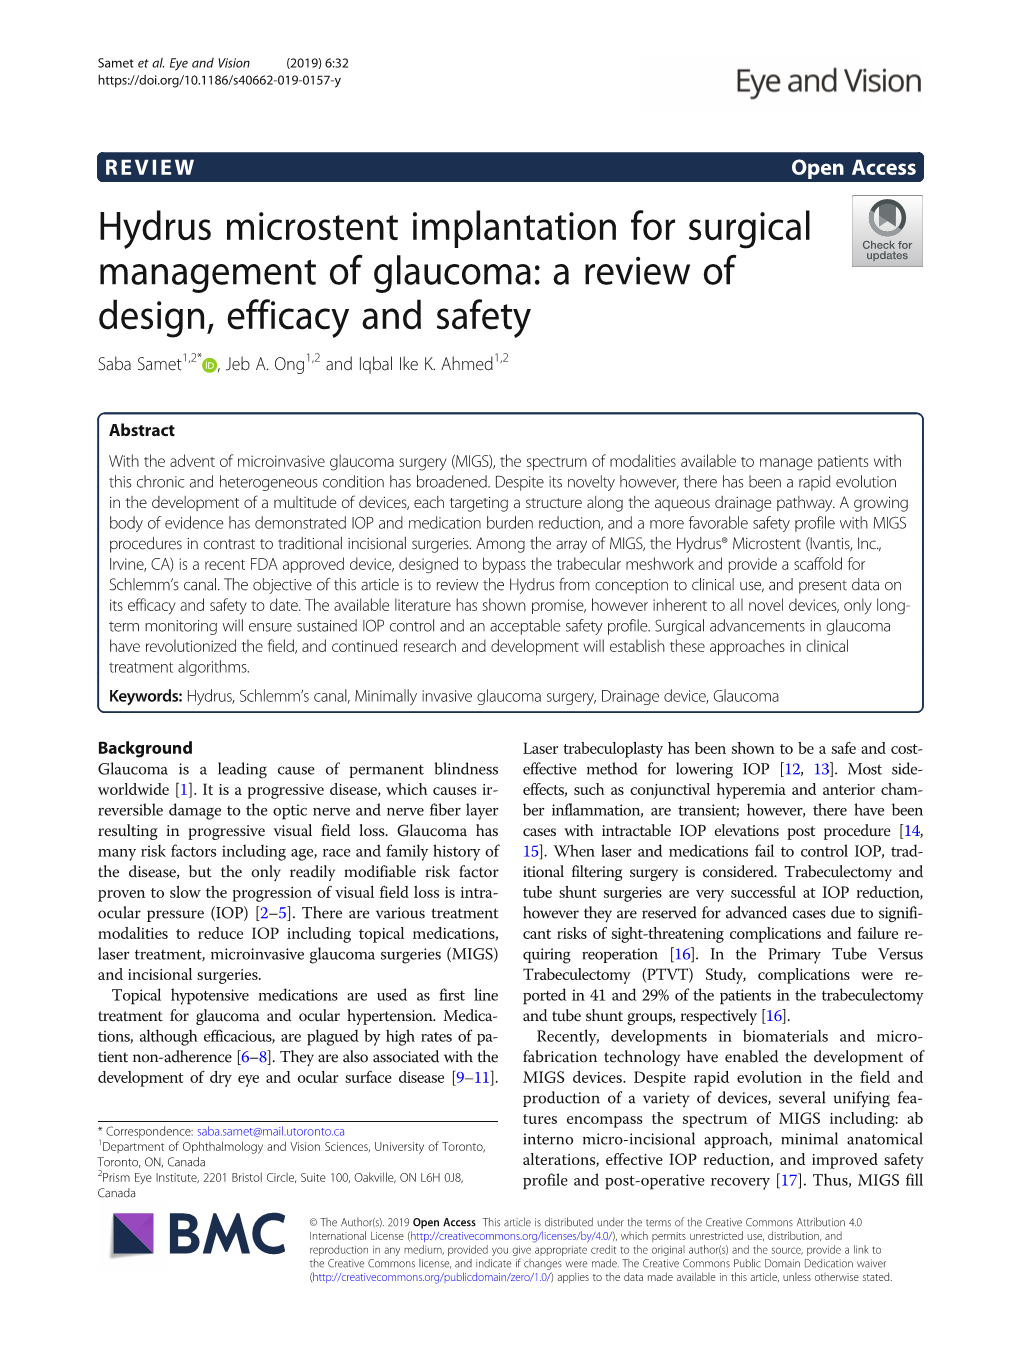 Hydrus Microstent Implantation for Surgical Management of Glaucoma: a Review of Design, Efficacy and Safety Saba Samet1,2* , Jeb A